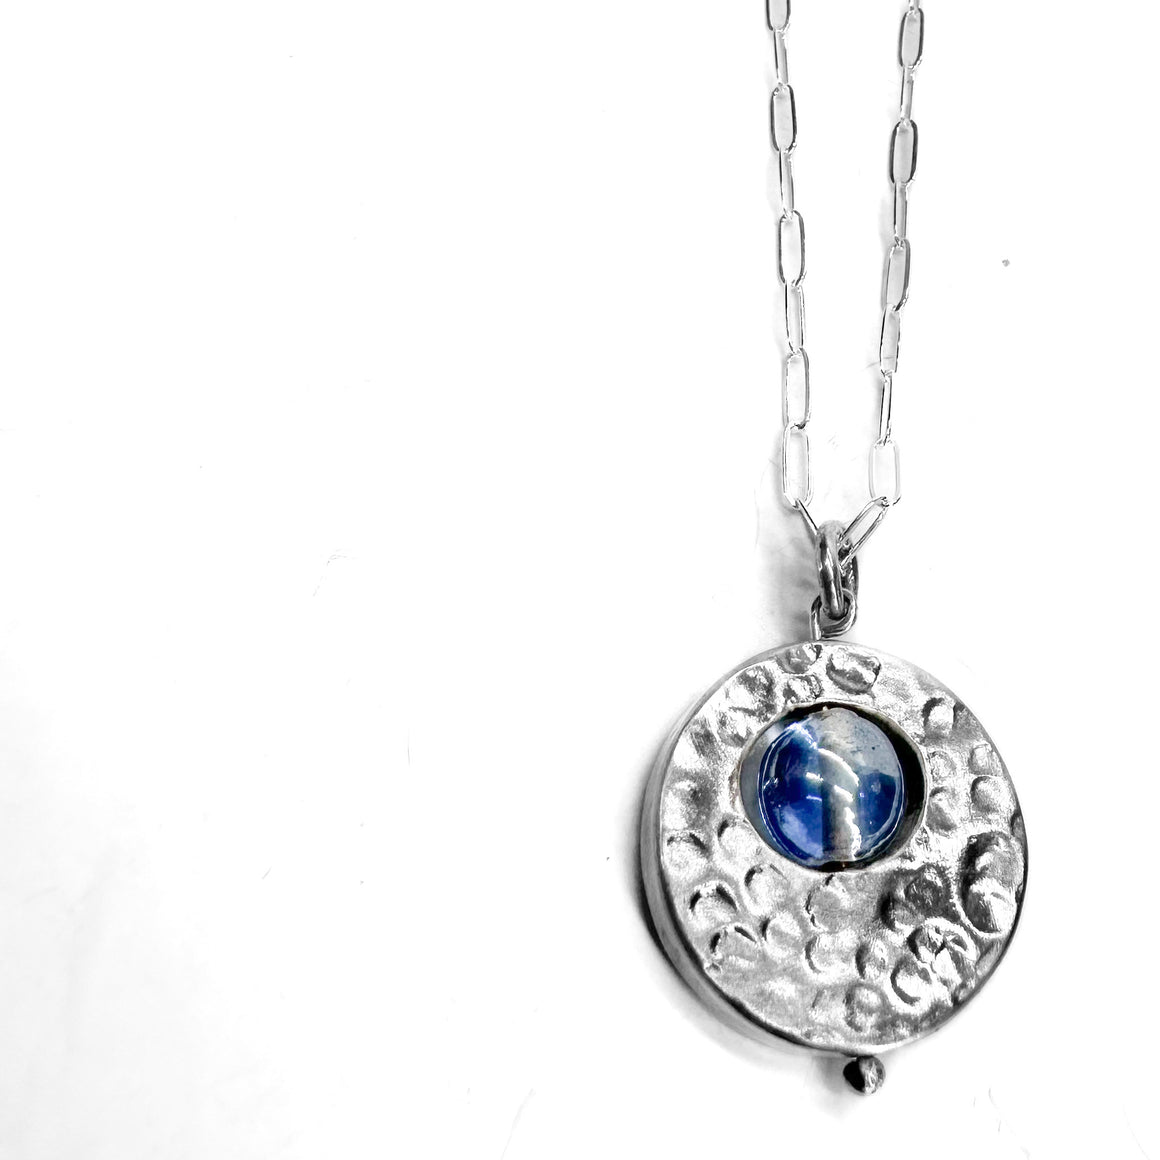 Round Pendant With Center Blue Bead Necklace